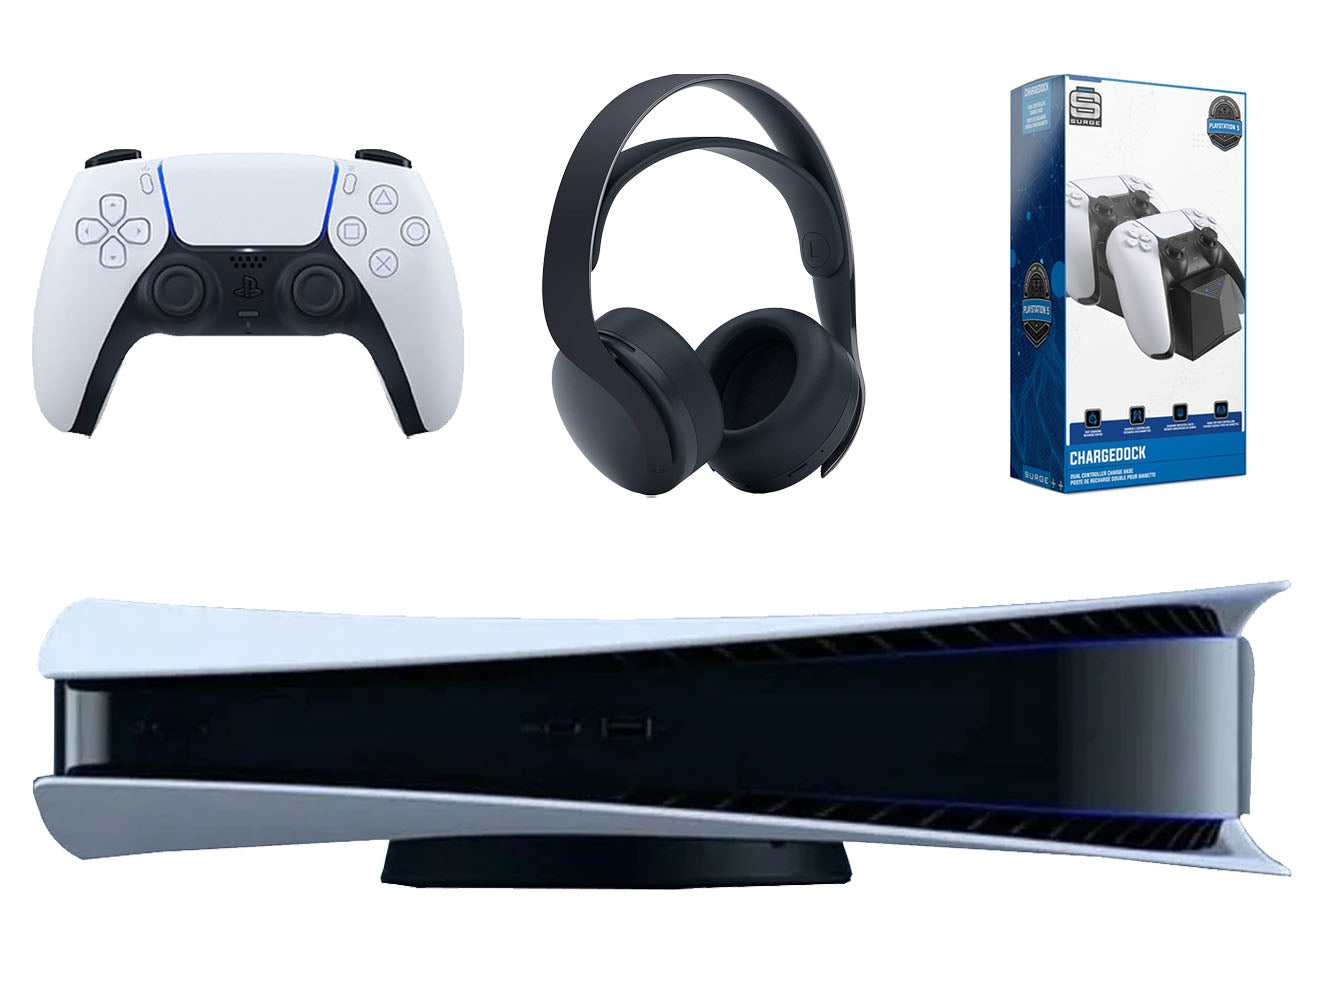 Sony Playstation 5 Digital Edition Console with Black PULSE 3D Wireless Gaming Headset and Surge Dual Controller Charge Dock - Pro-Distributing